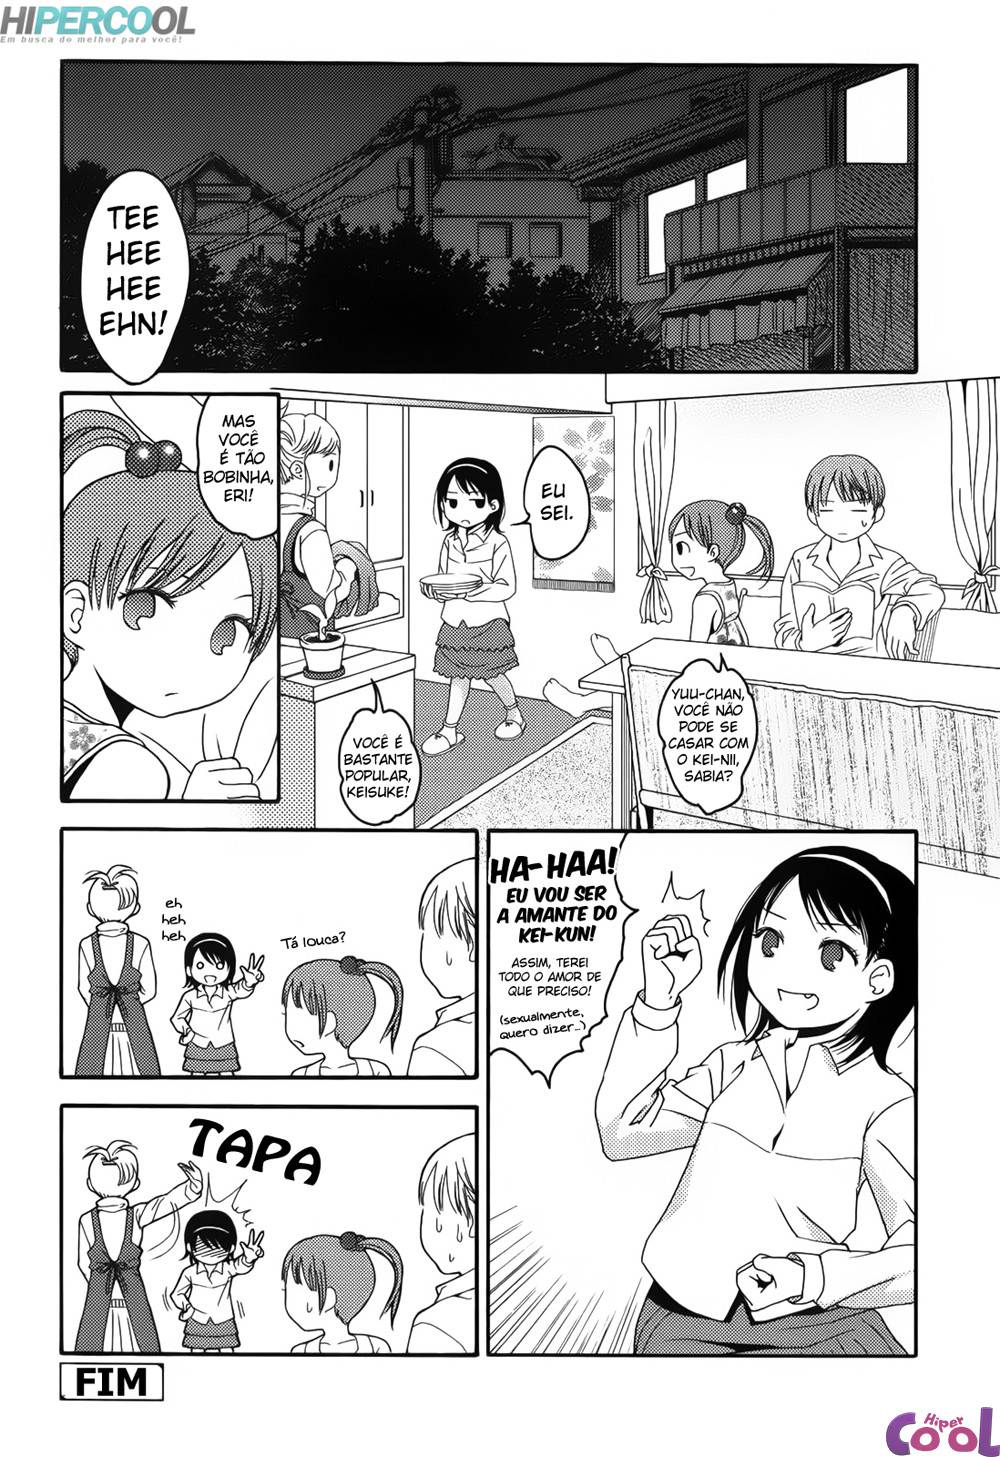 stand-by-me-chapter-02-page-20.jpg